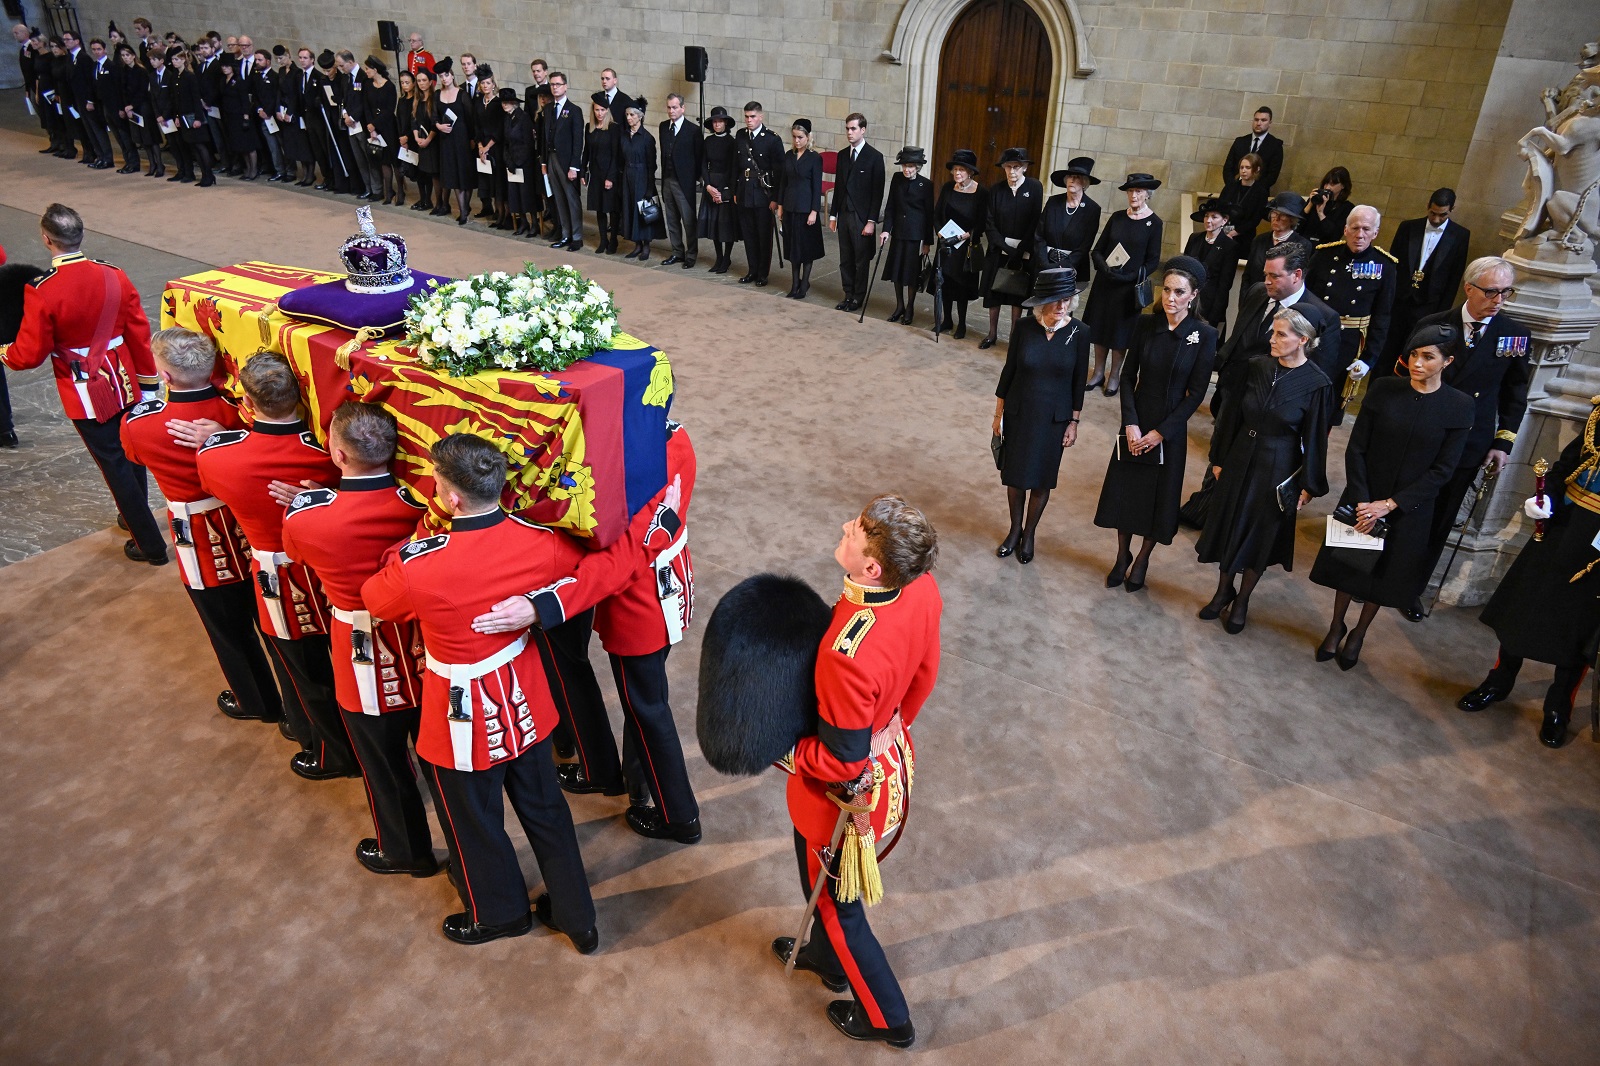 epa10184697 A handout photograph released by the UK Parliament shows pallbearers carrying in the coffin of Britain's Queen Elizabeth II past (L-R) Britain's Camilla, Queen Consort; Catherine, Princess of Wales; Sophie, Countess of Wessex; and Meghan, Duchess of Sussex into Westminster Hall for the service for the commencement of the Queen's Lying-in-State at the Palace of Westminster in London, Britain, 14 September 2022. The queen's lying in state will last for four days, ending on the morning of the state funeral on the 19 September.  EPA/UK PARLIAMENT/JESSICA TAYLOR HANDOUT -- MANDATORY CREDIT: UK PARLIAMENT/JESSICA TAYLOR -- HANDOUT EDITORIAL USE ONLY/NO SALES